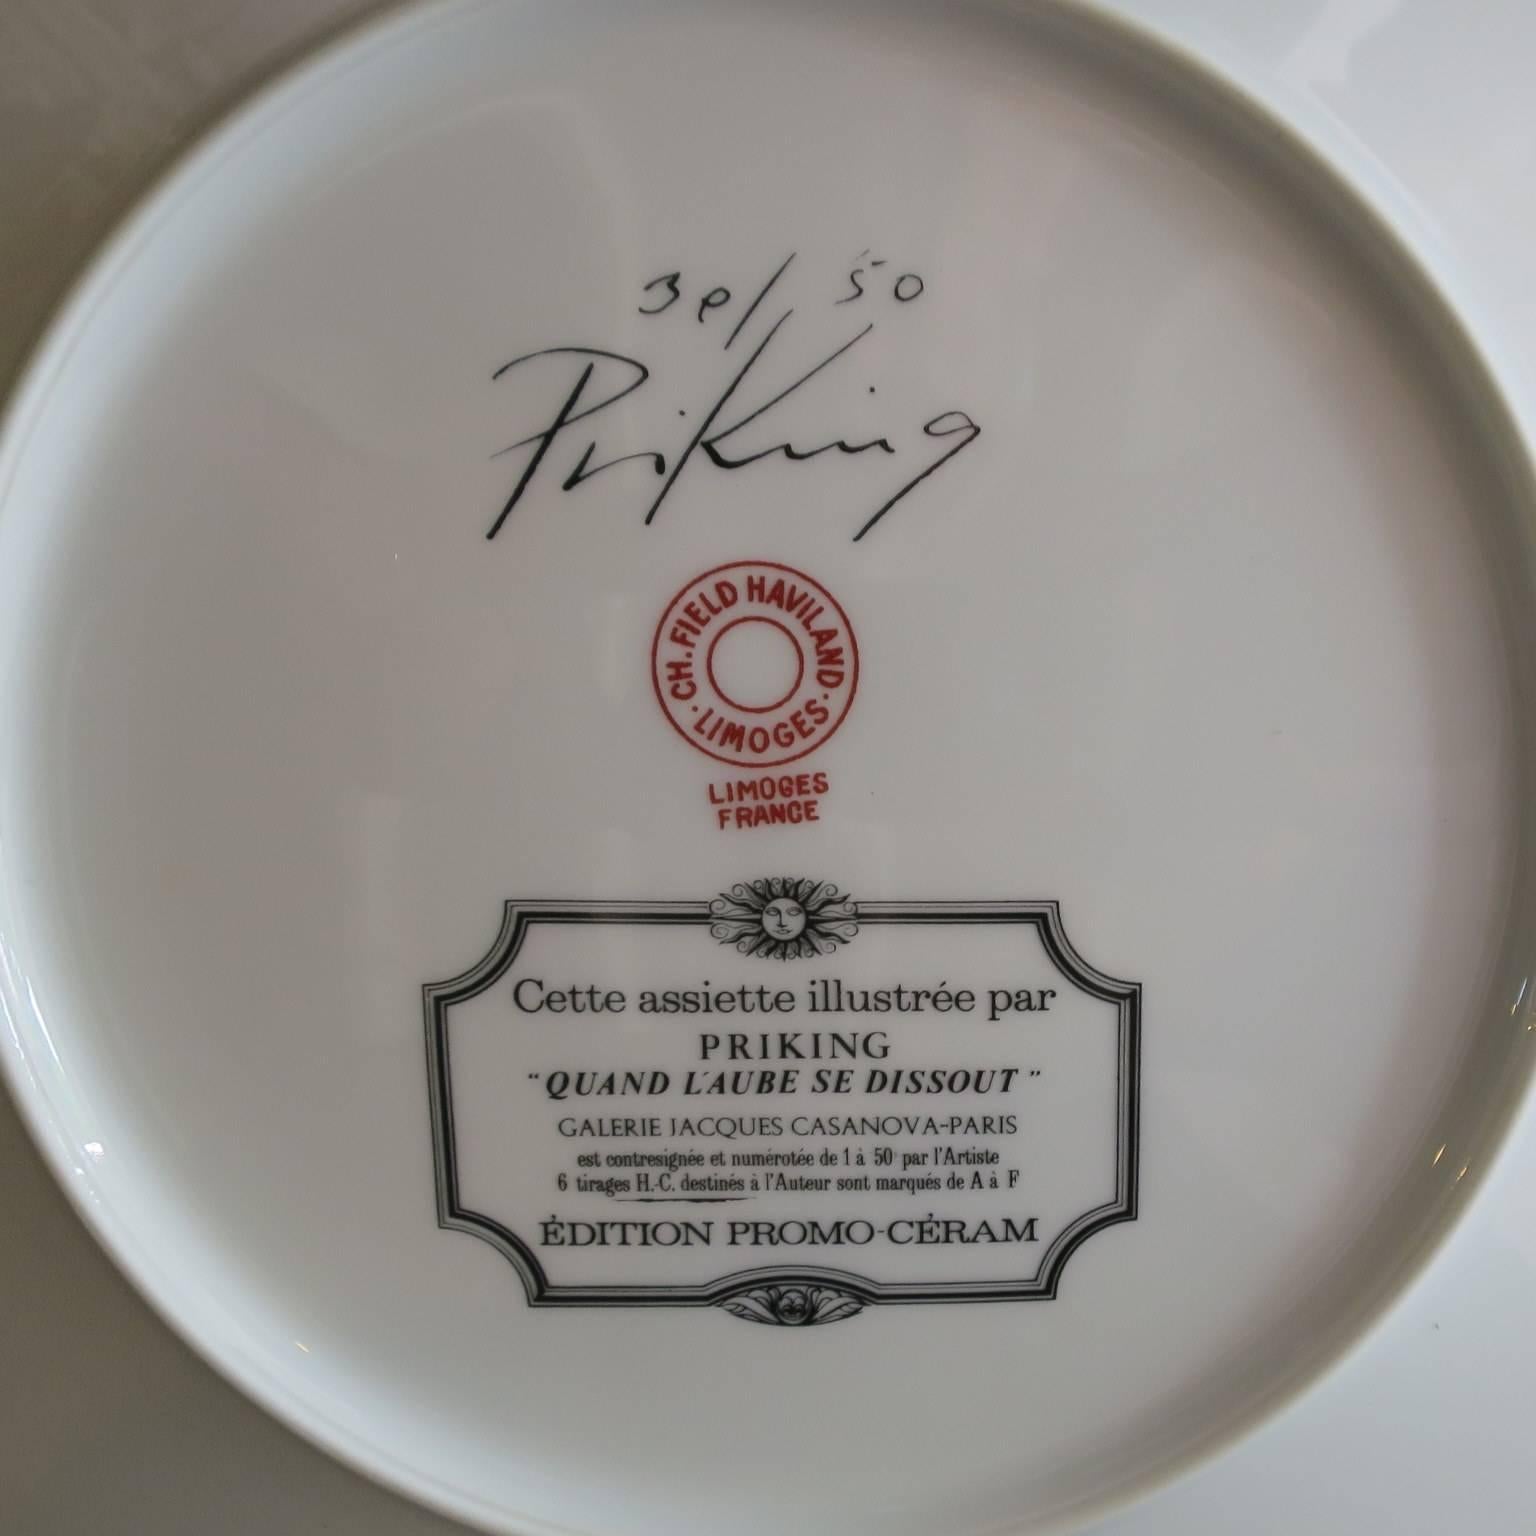 Hand-painted and signed limited edition by the French painter Priking by the manufacture Charles Fields Haviland.
Each porcelain is signed and numbered.
Measure: Diameter 10